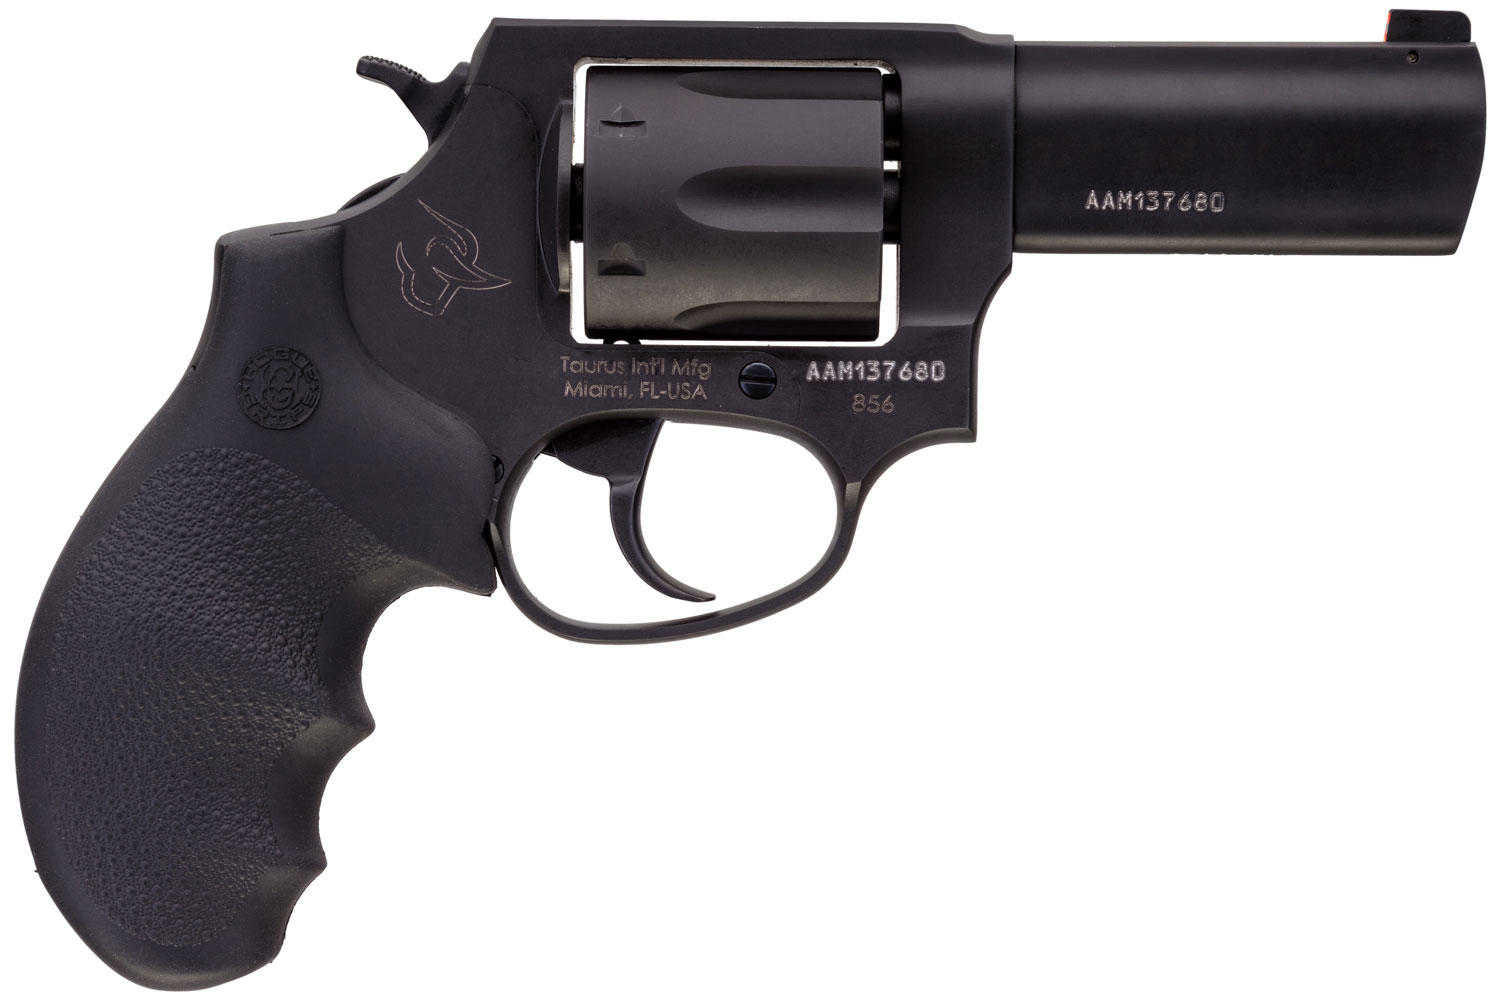 The Taurus Defender 856 is finely tuned to deliver the ultimate peace of mi...